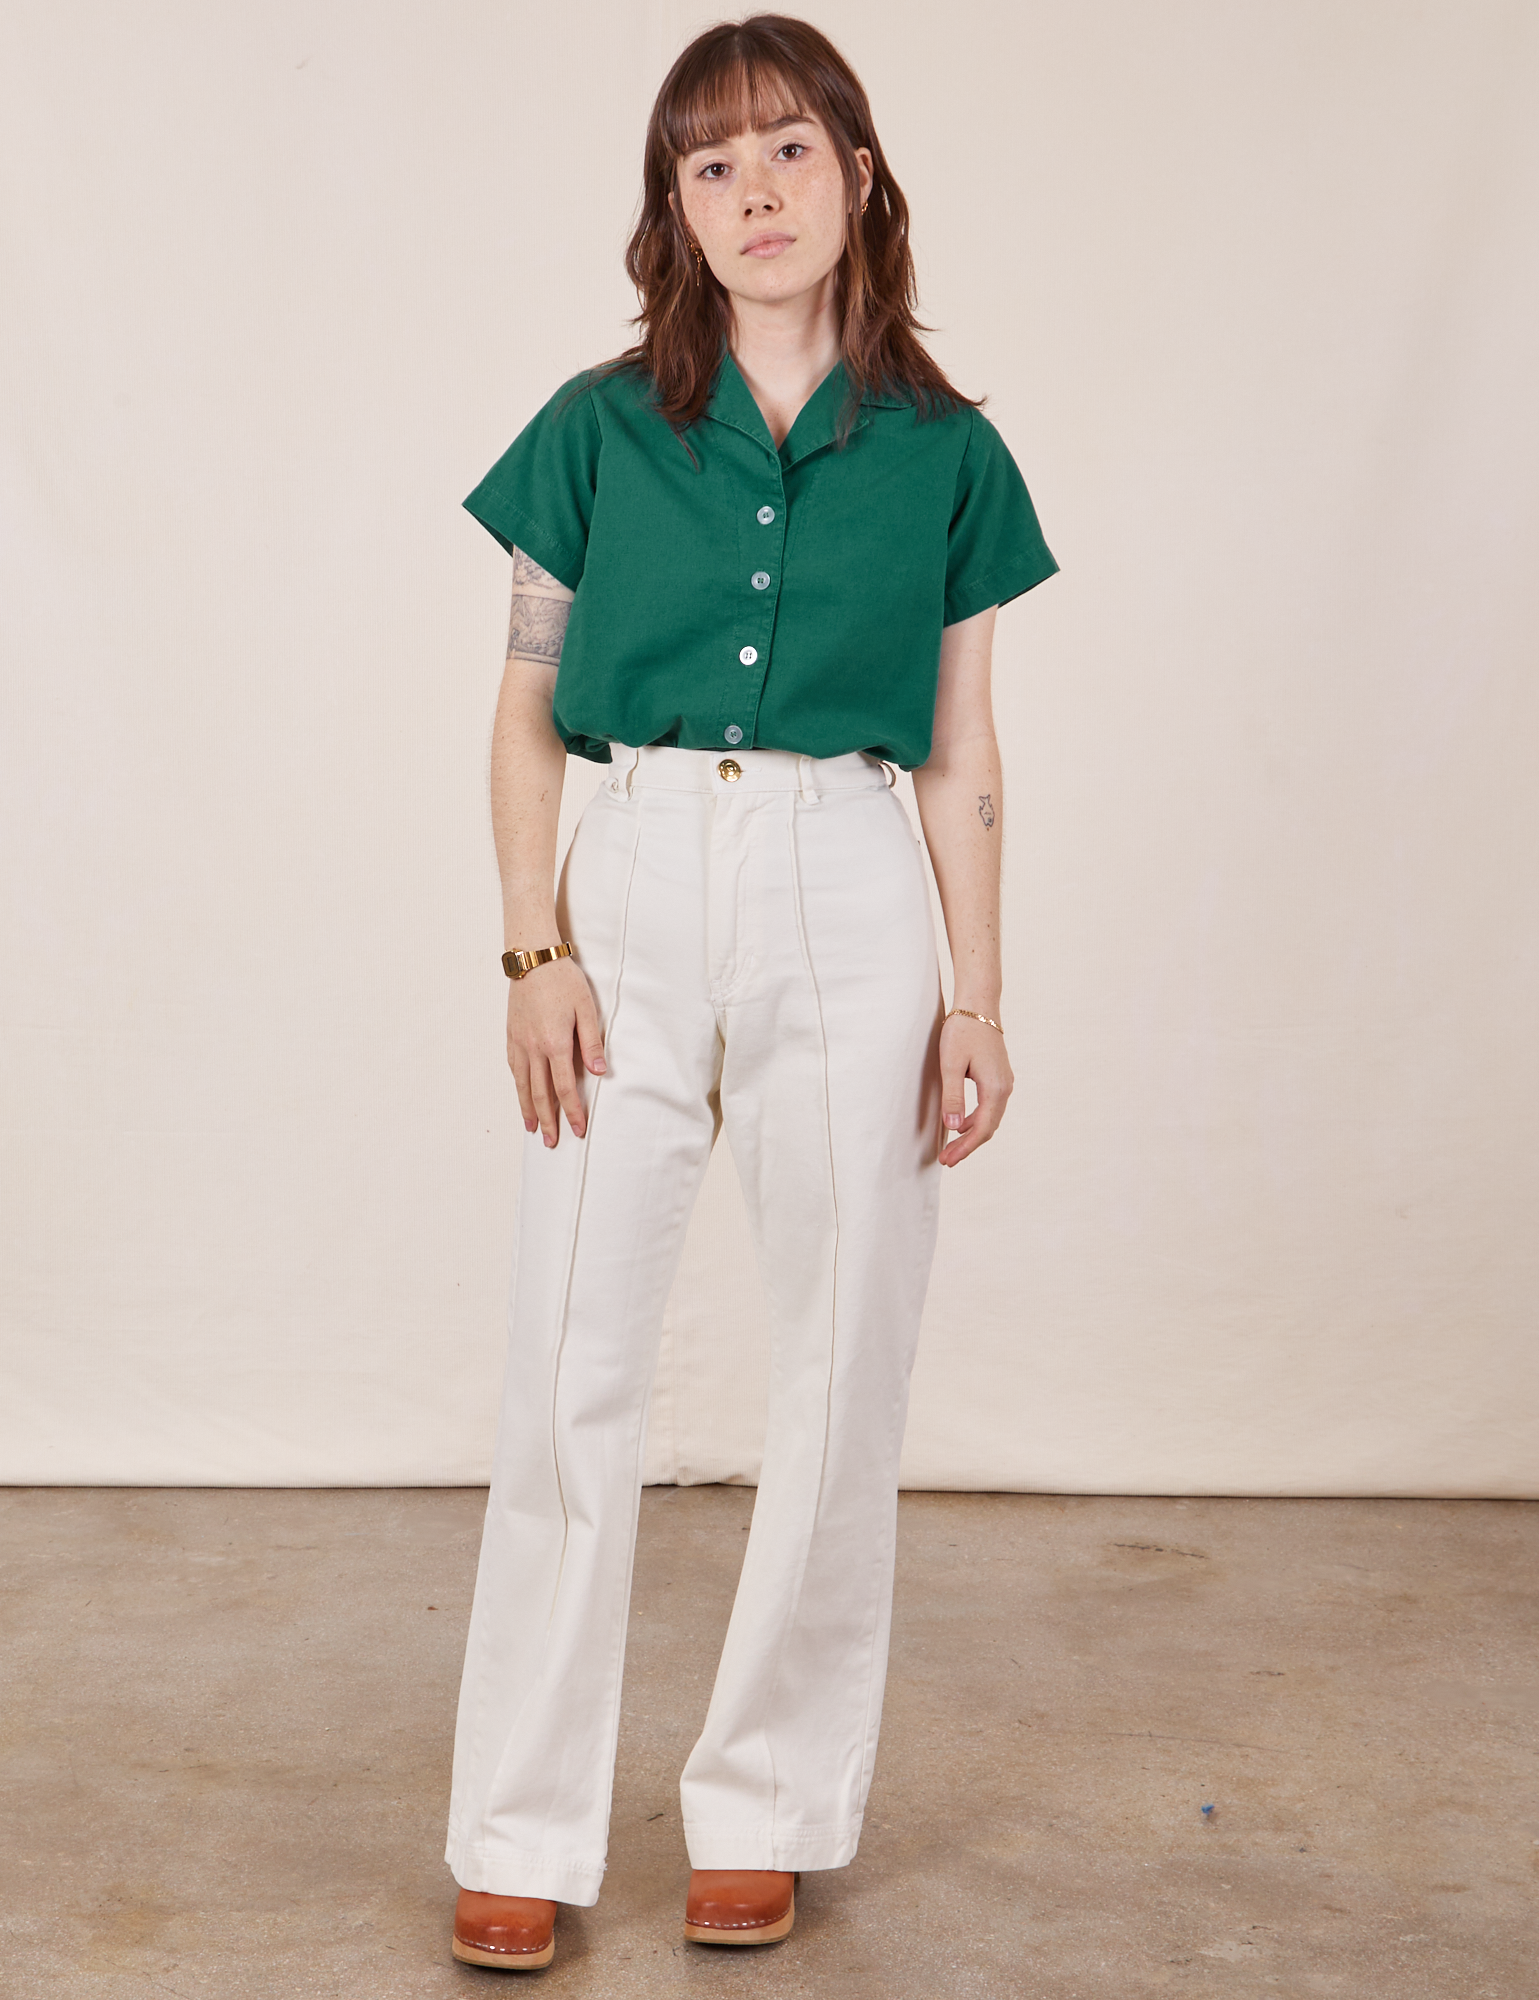 Hana is wearing Pantry Button-Up in Hunter Green tucked into vintage off-white Petite Western Pants